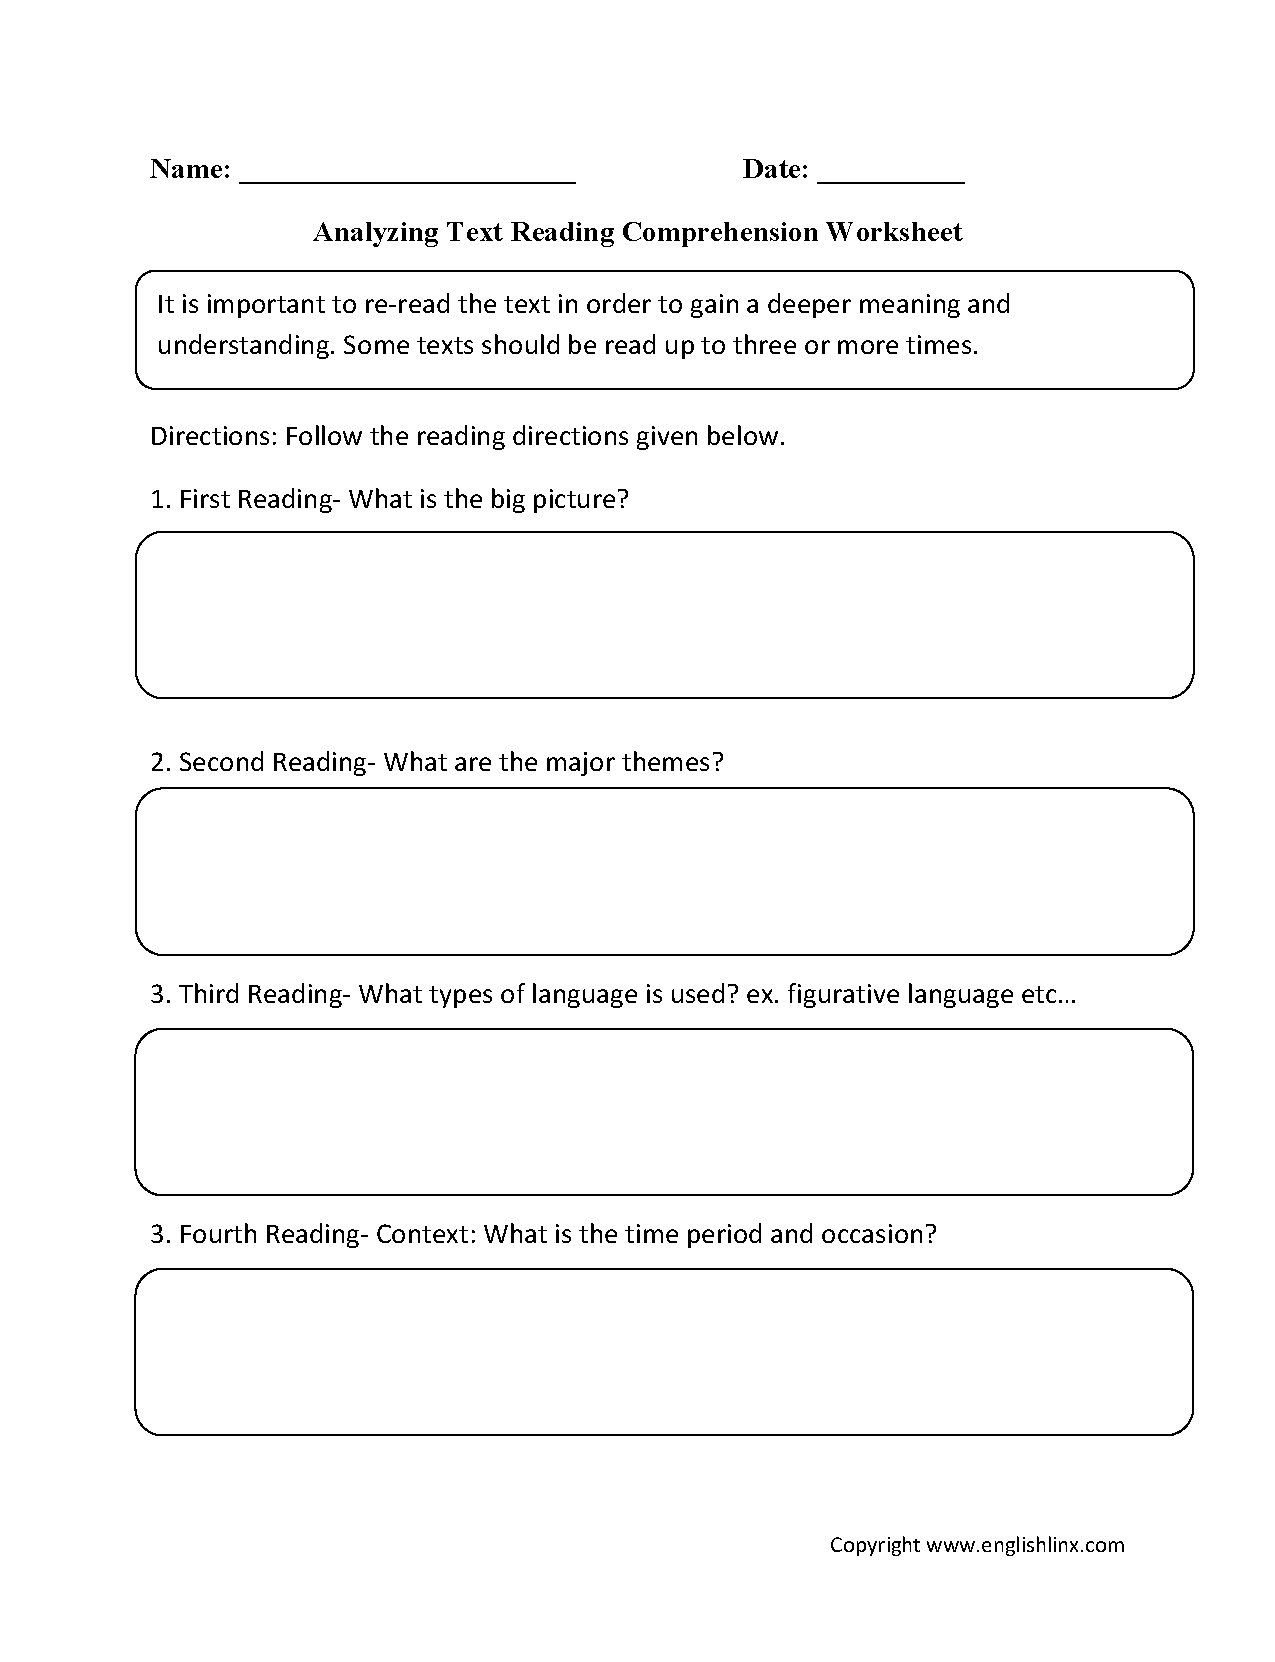 Analyzing Text Reading Comprehension Worksheets